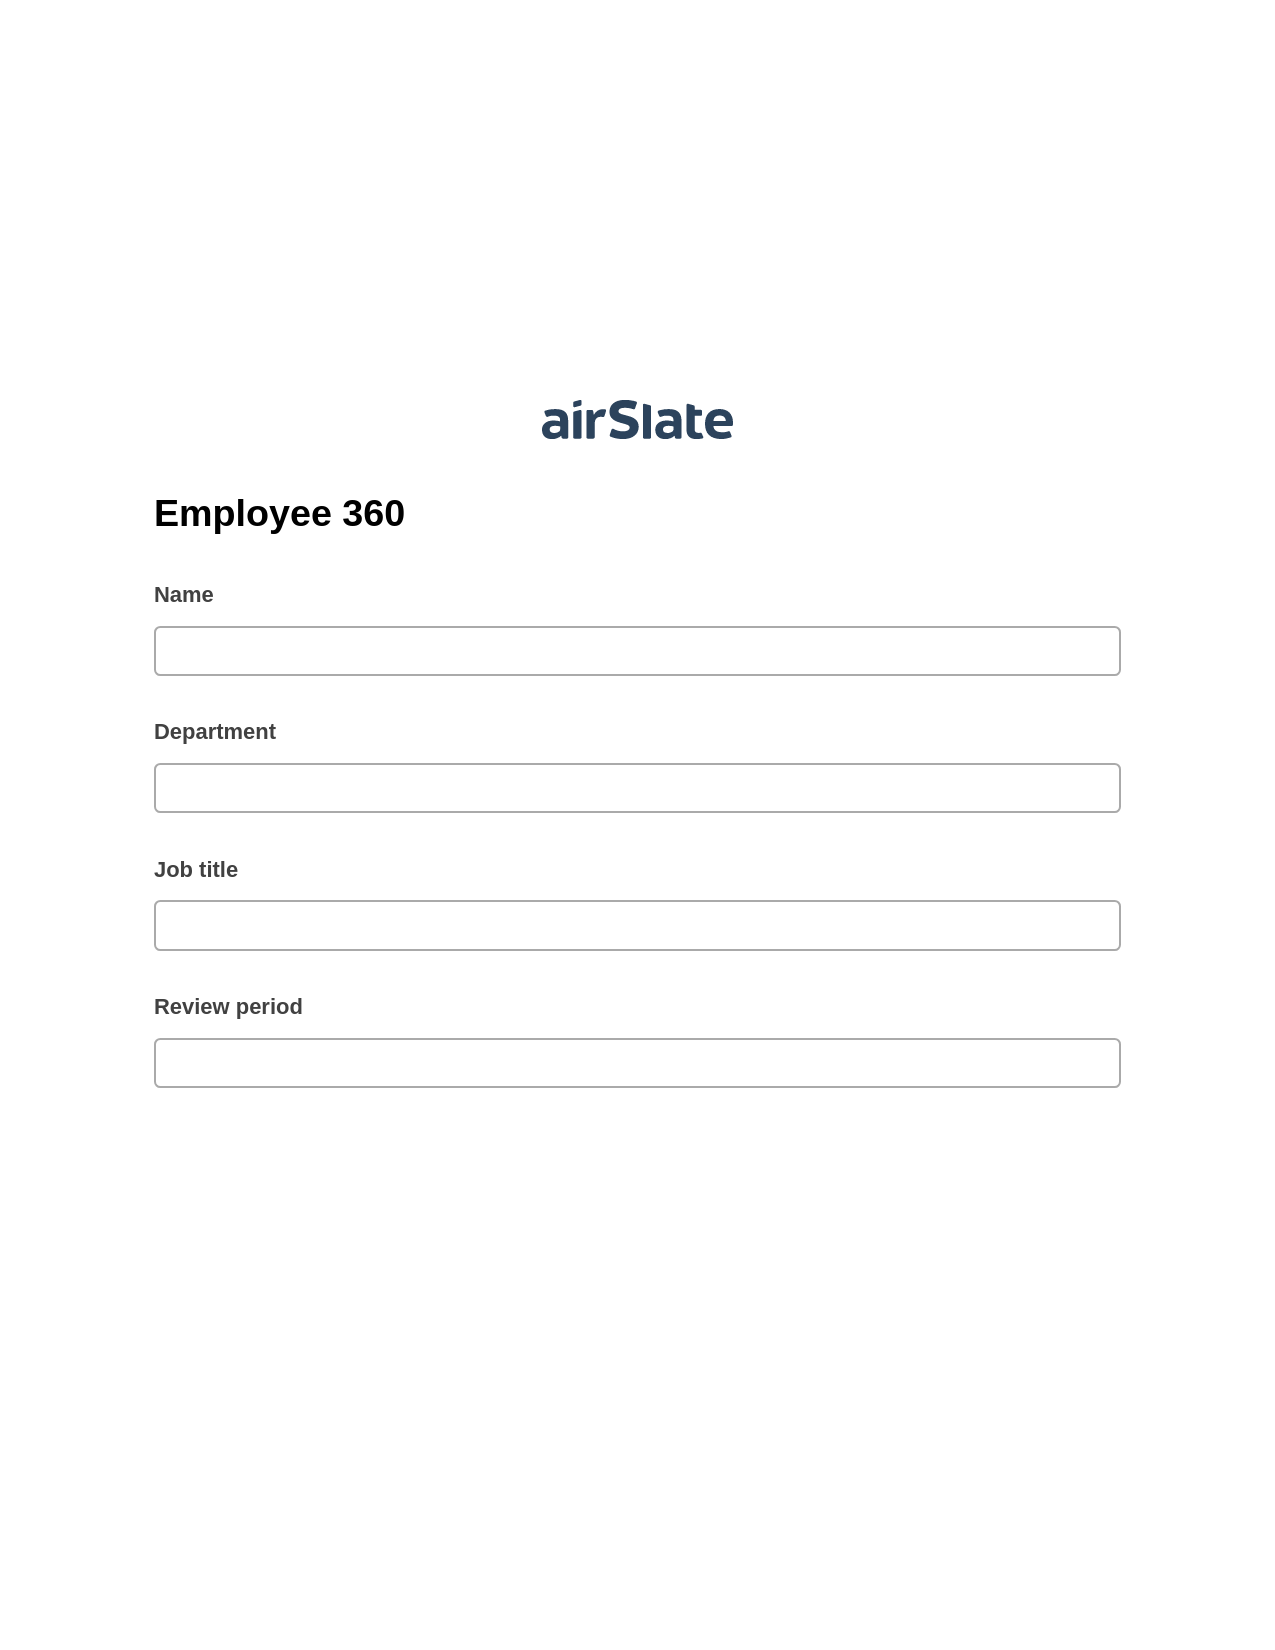 Multirole Employee 360 Pre-fill from MS Dynamics 365 Records, Update MS Dynamics 365 Record Bot, Post-finish Document Bot